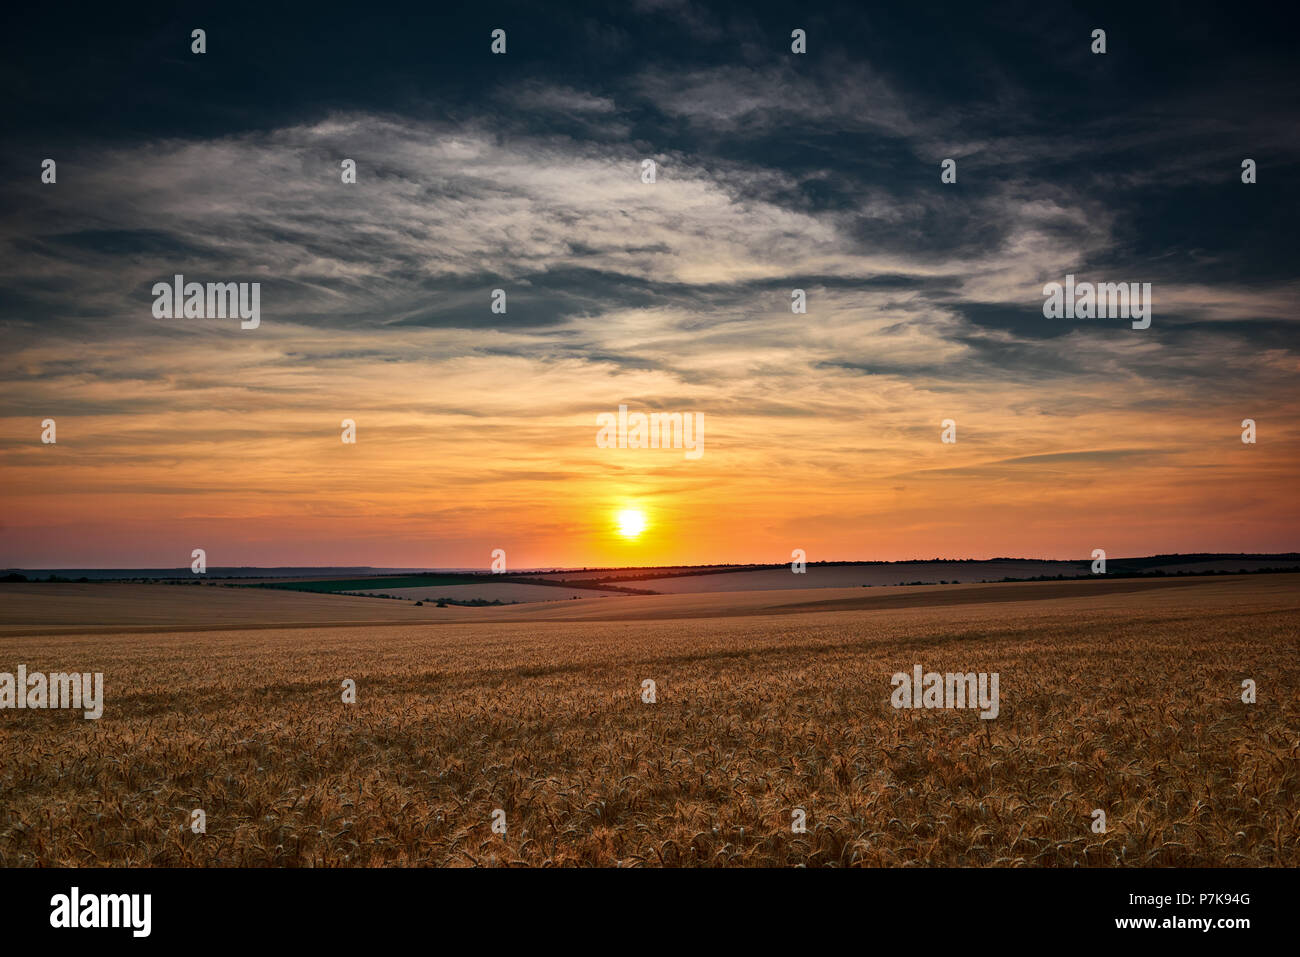 beautiful sunset is in the whetaen field, colorful sky with clouds Stock Photo